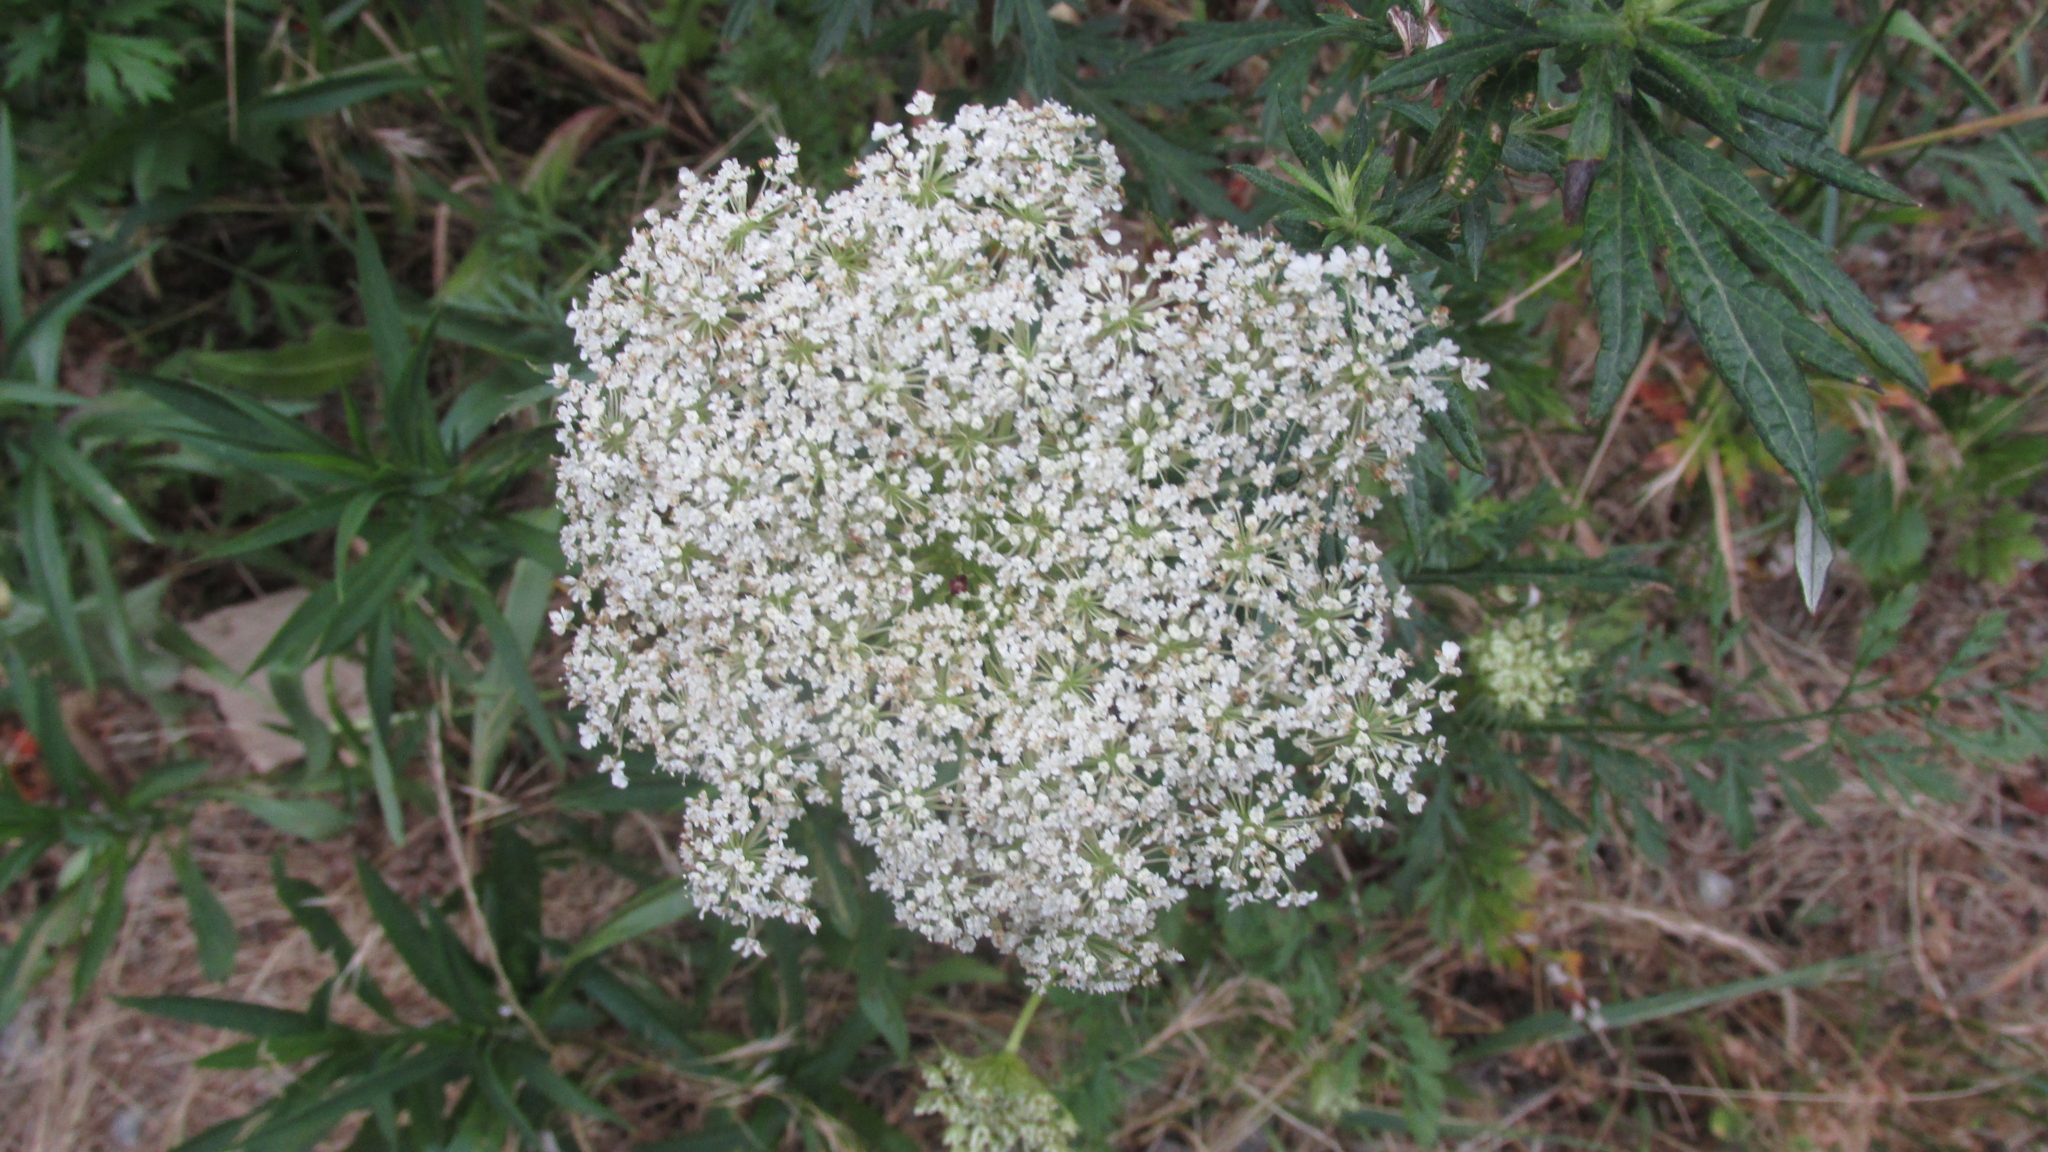 Unique Queen Anne’s lace bloom, made up of hundreds of small single flowers. 